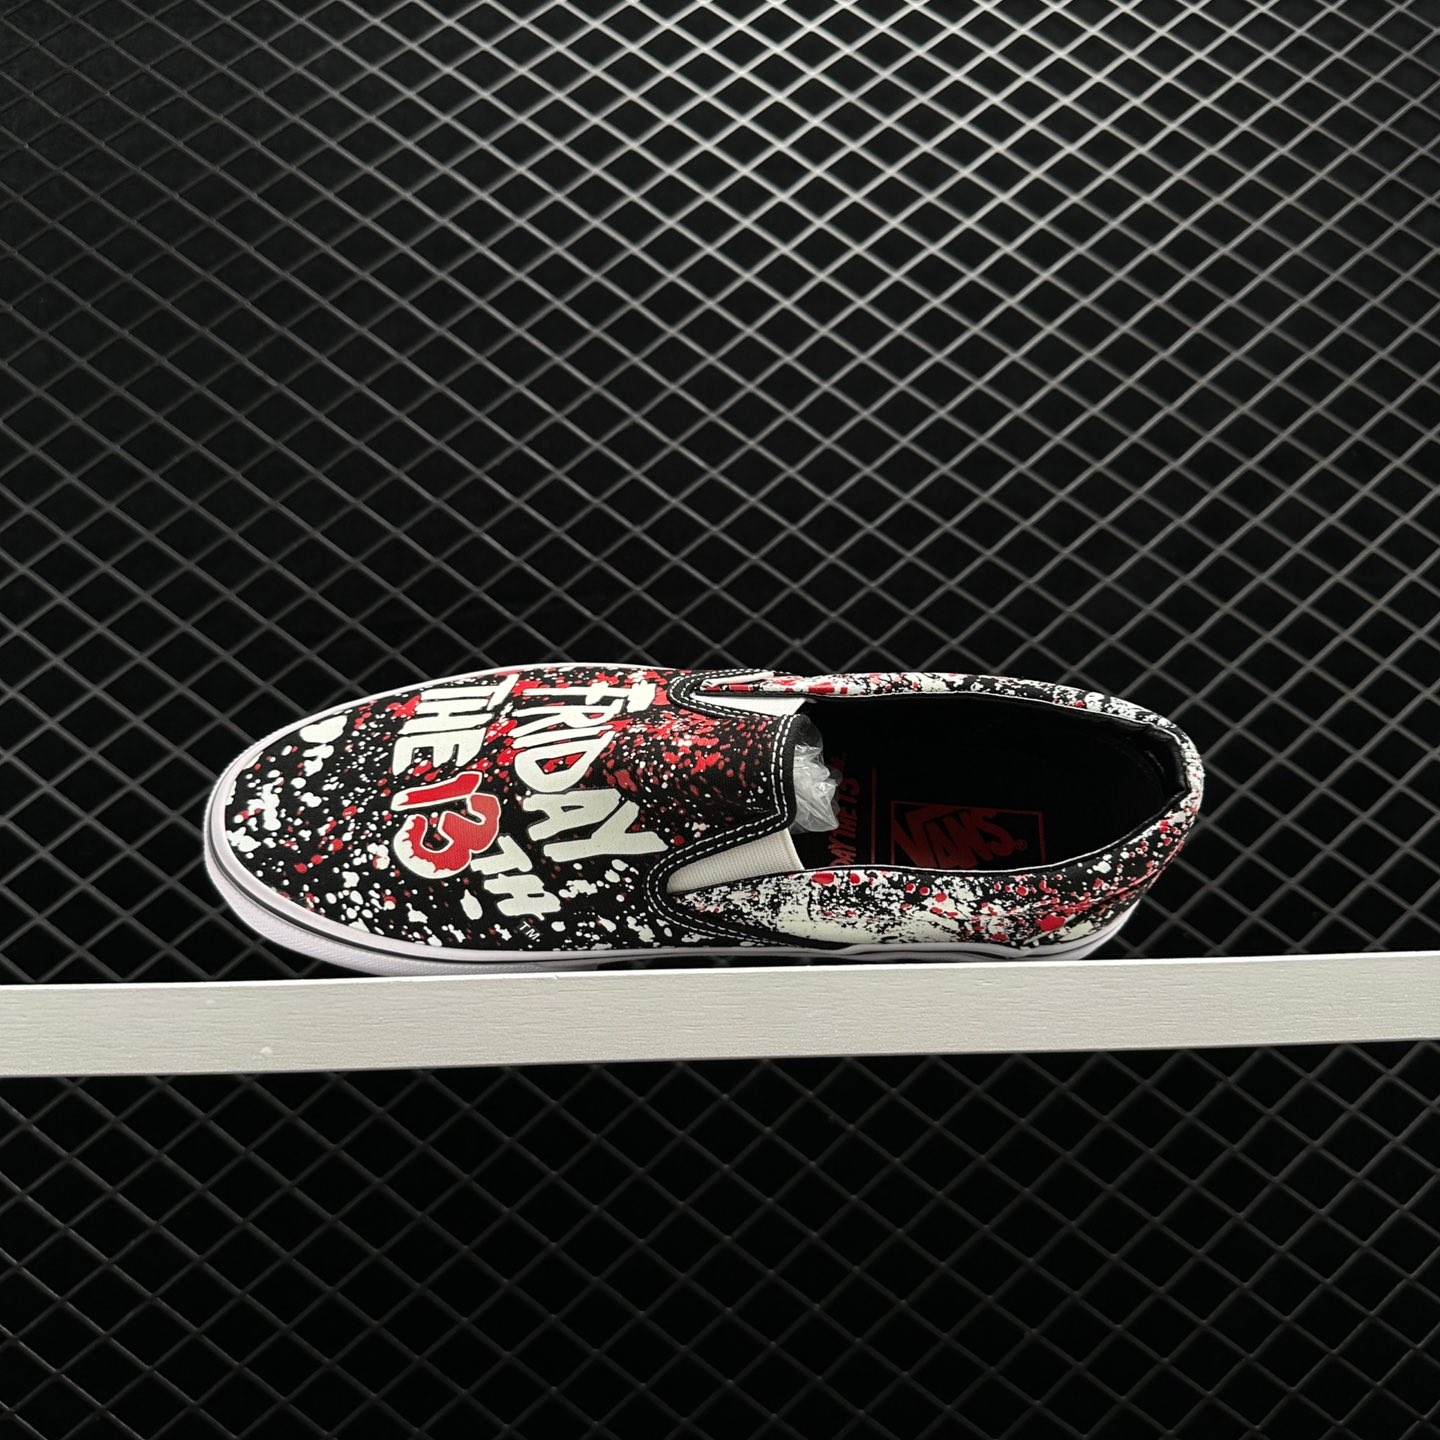 Vans Classic Slip-On Horror Pack Friday The 13th VN0A4U38ZPL - Jason Voorhees